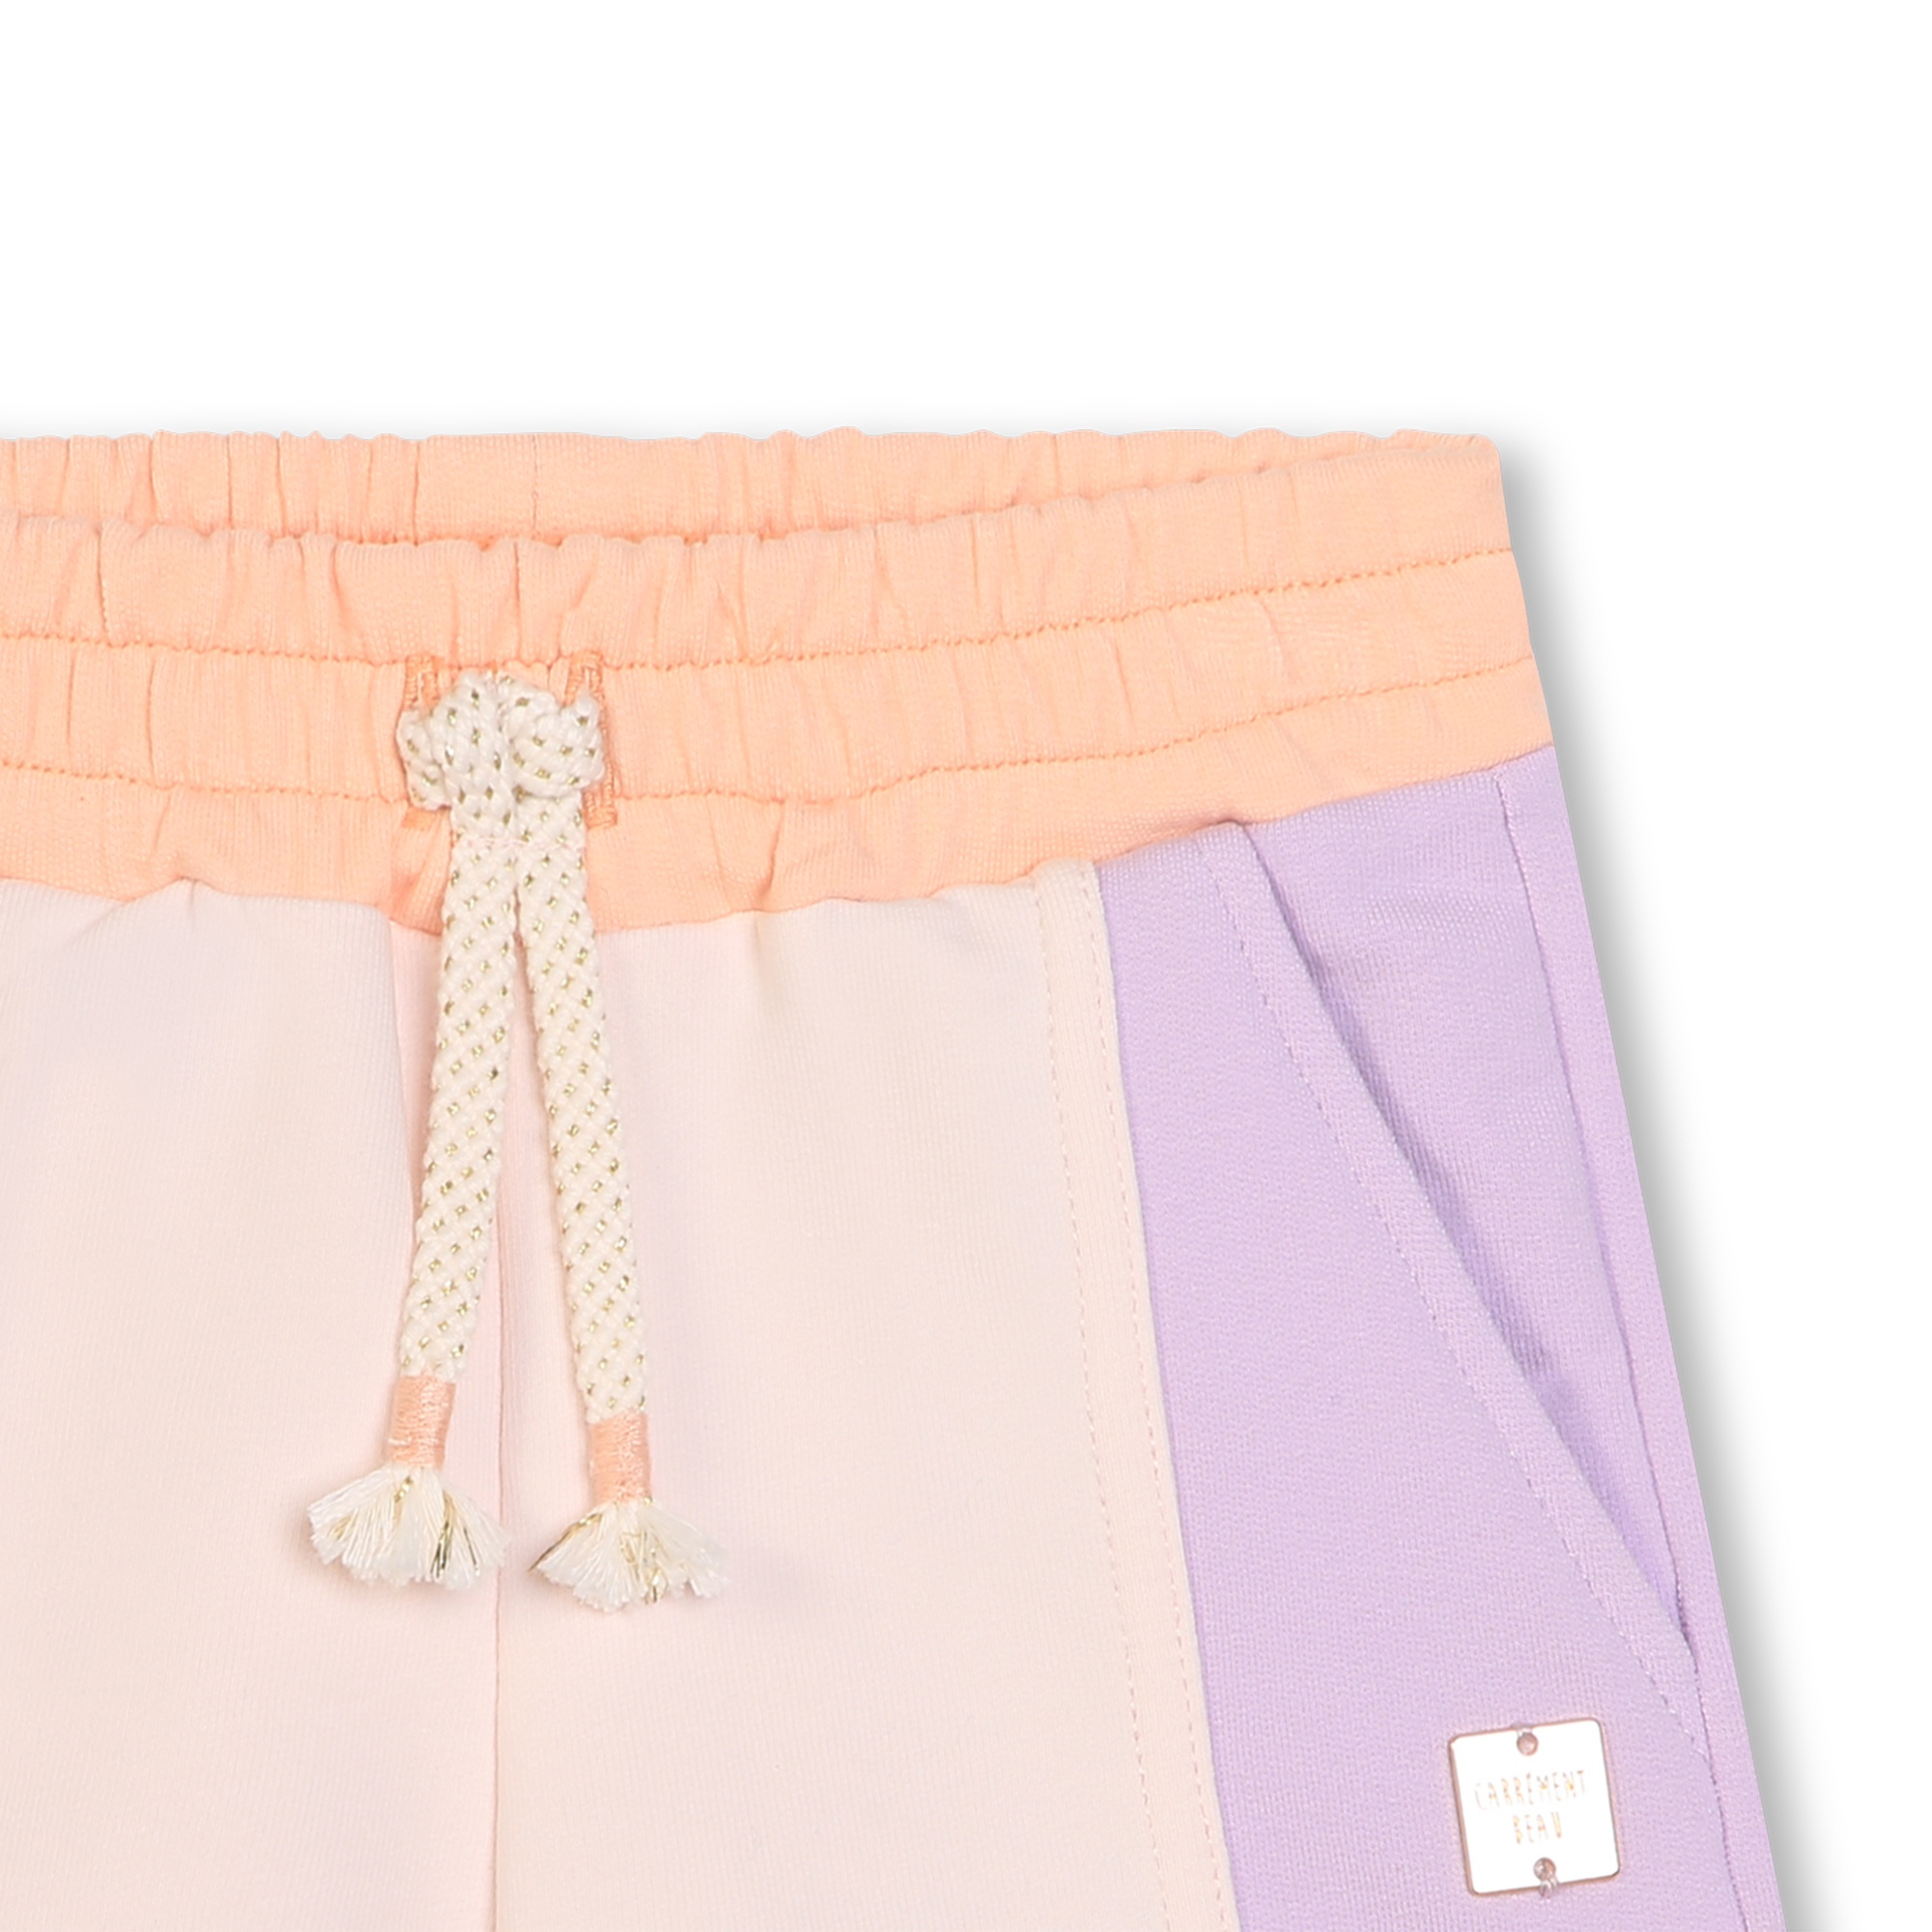 Fleece shorts with plaque CARREMENT BEAU for GIRL